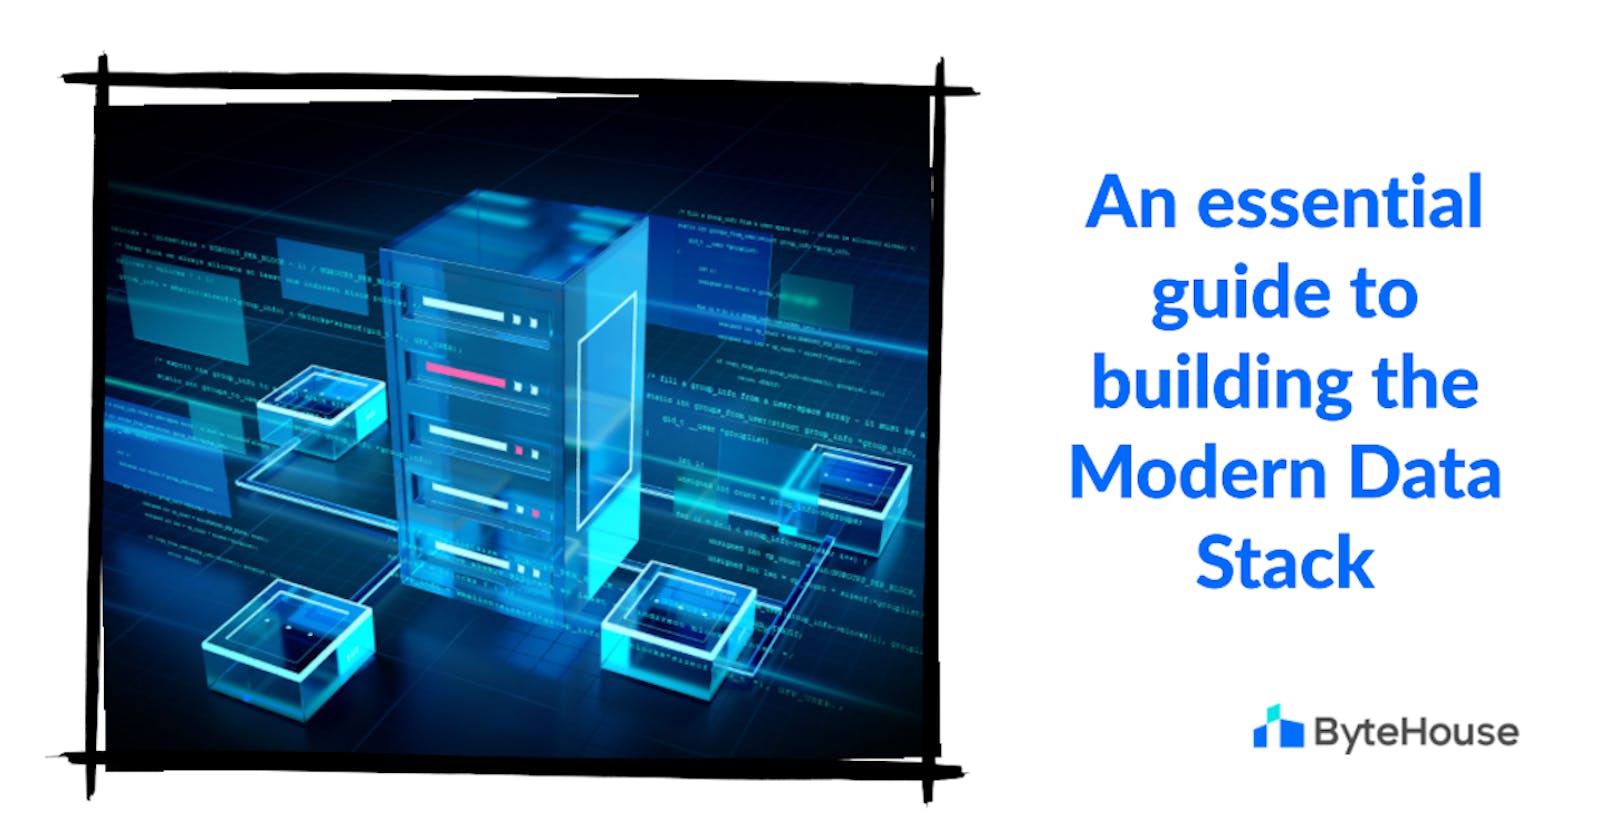 The Modern Data Stack - An essential guide